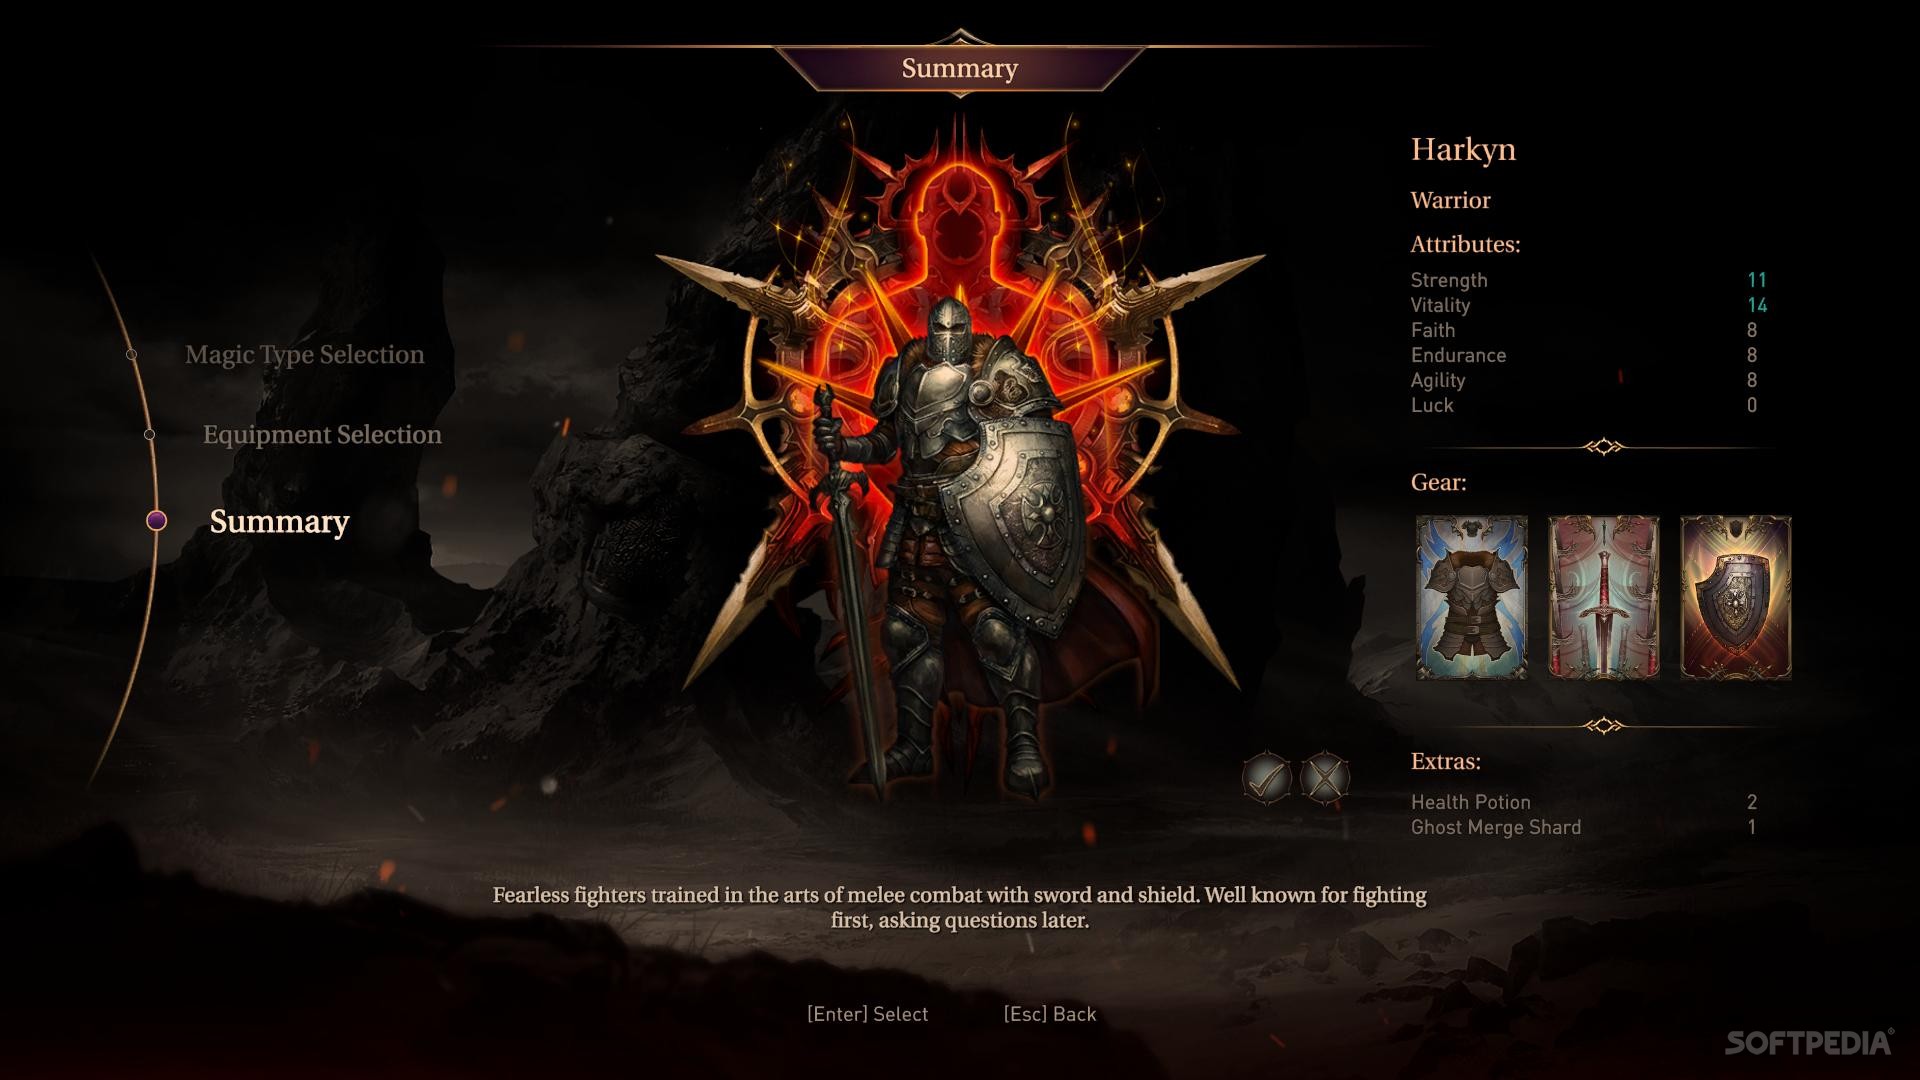 Lords of the Fallen - PC Version Review » CelJaded